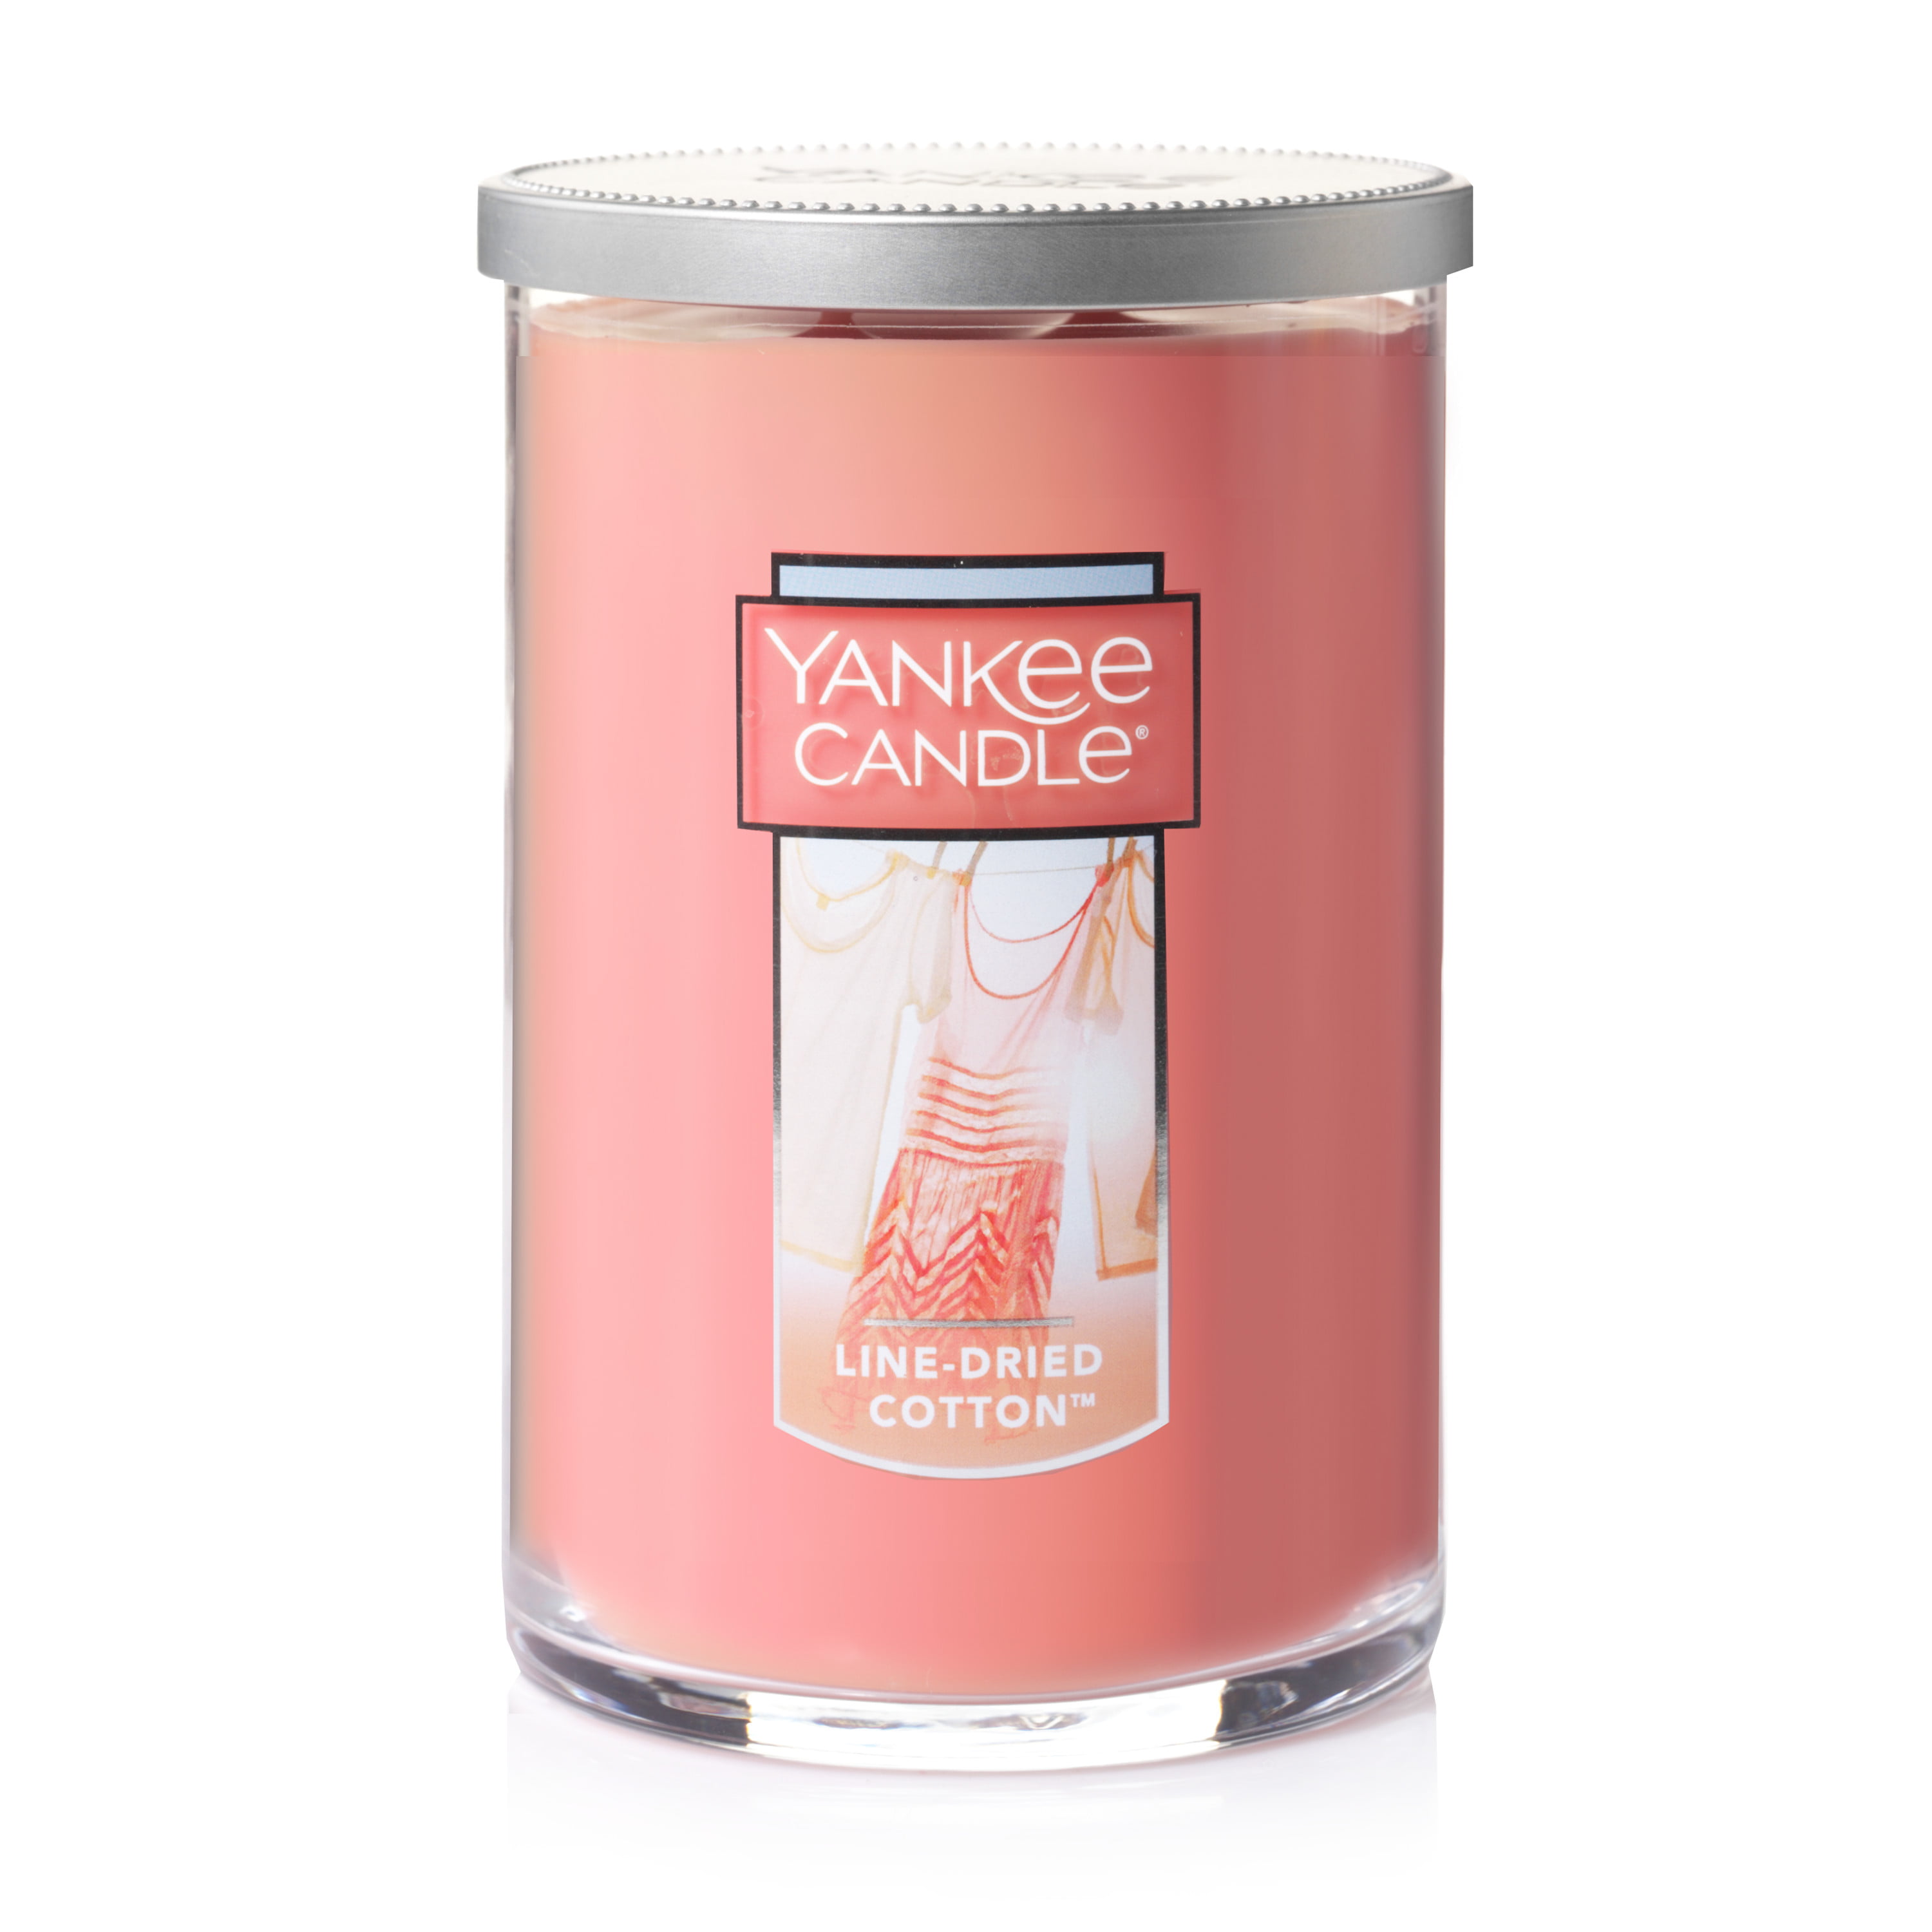 Yankee Candle ~ LINE-DRIED COTTON ~ 22oz Large Jar *Free Expedited Shipping* 